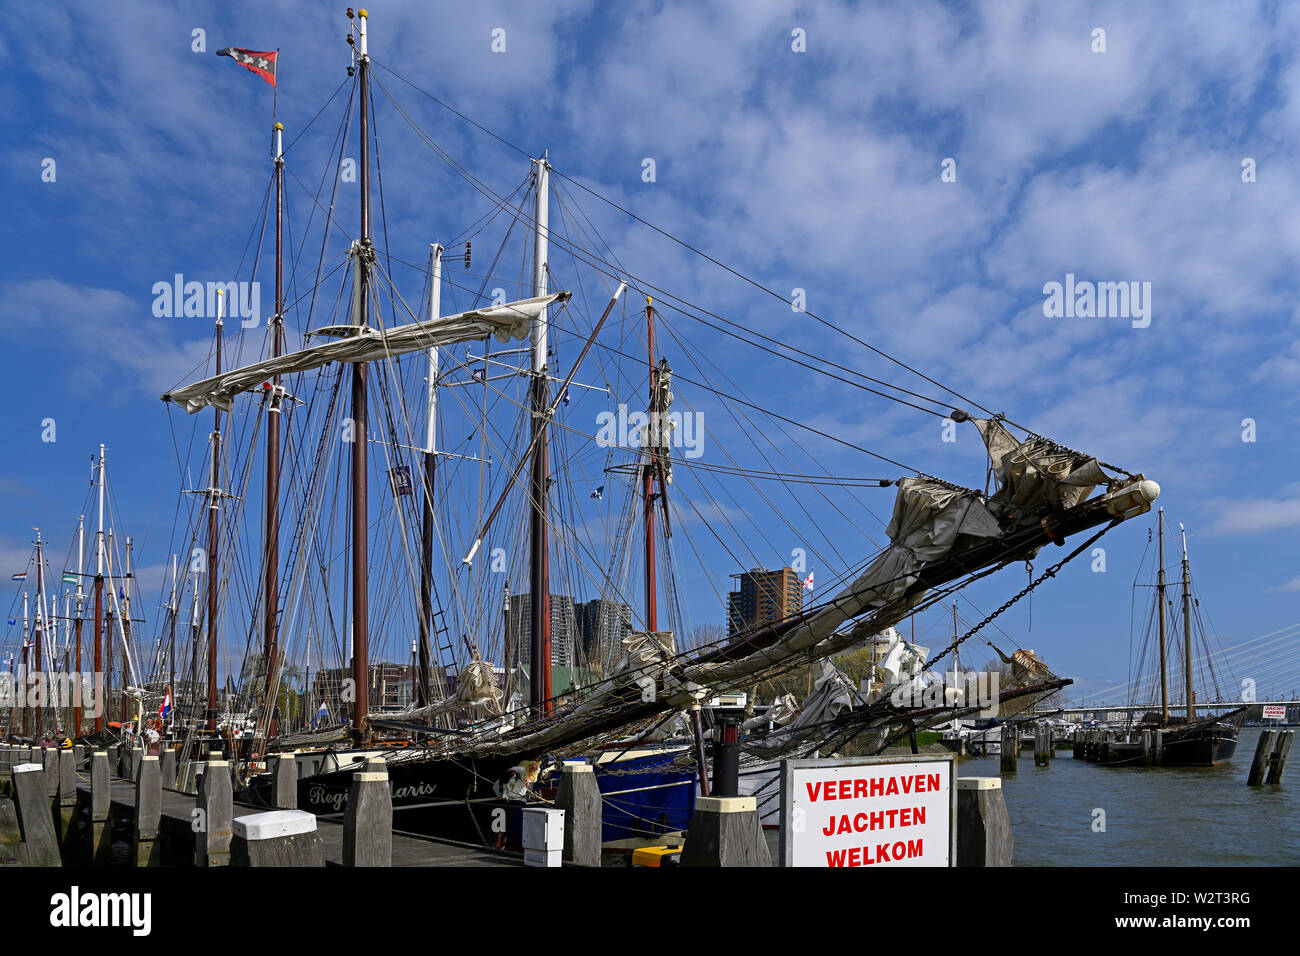 rotterdam,  netherlands - march 31, 2019: traditional sailing ships berthed at veerhaven and nieuwe maas river in the historic scheepvaartkwartier (sh Stock Photo